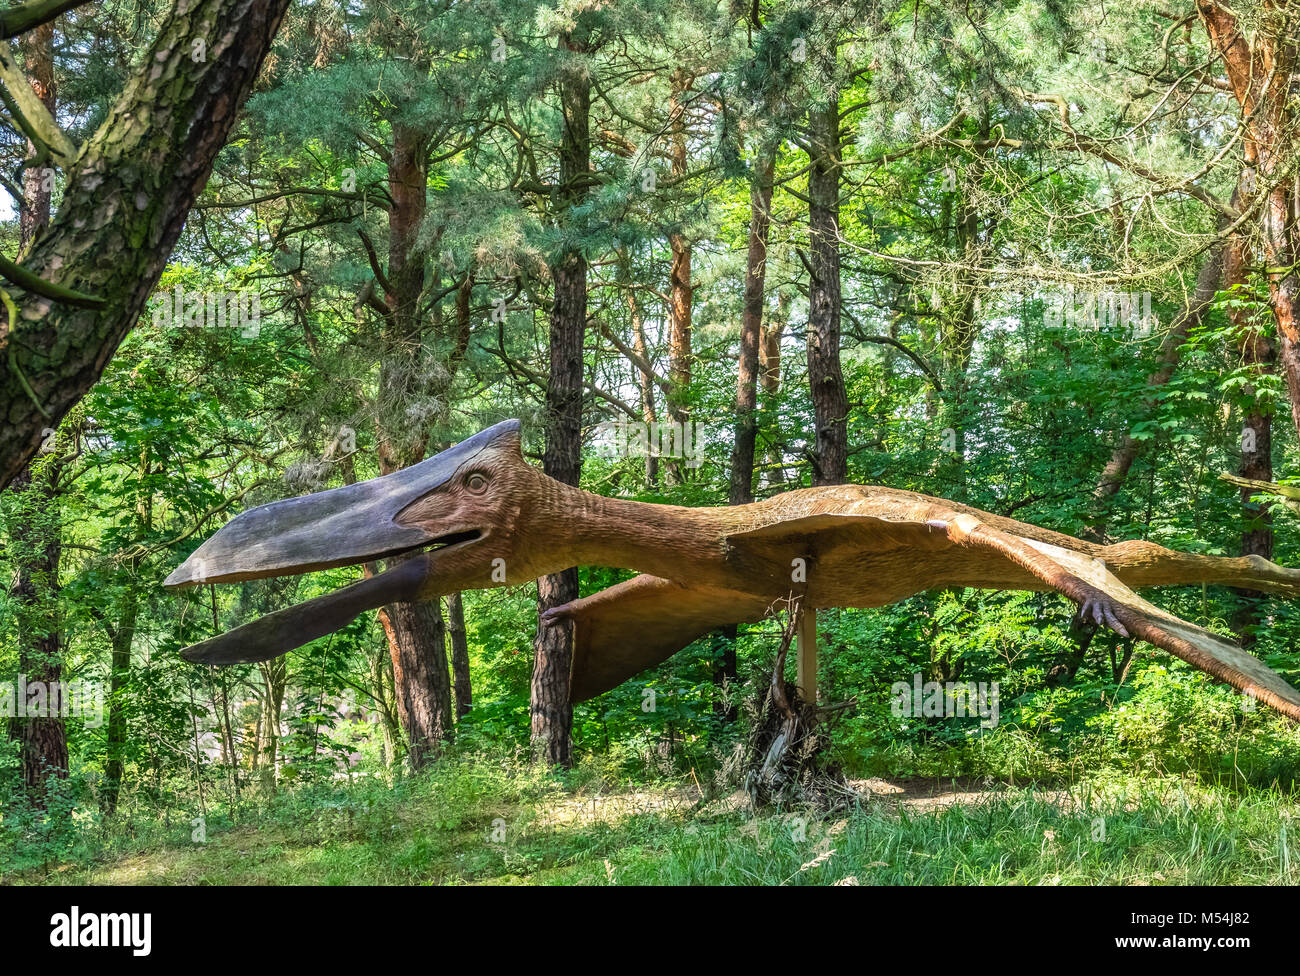 Quetzalcoatlus High Resolution Stock Photography And Images Alamy